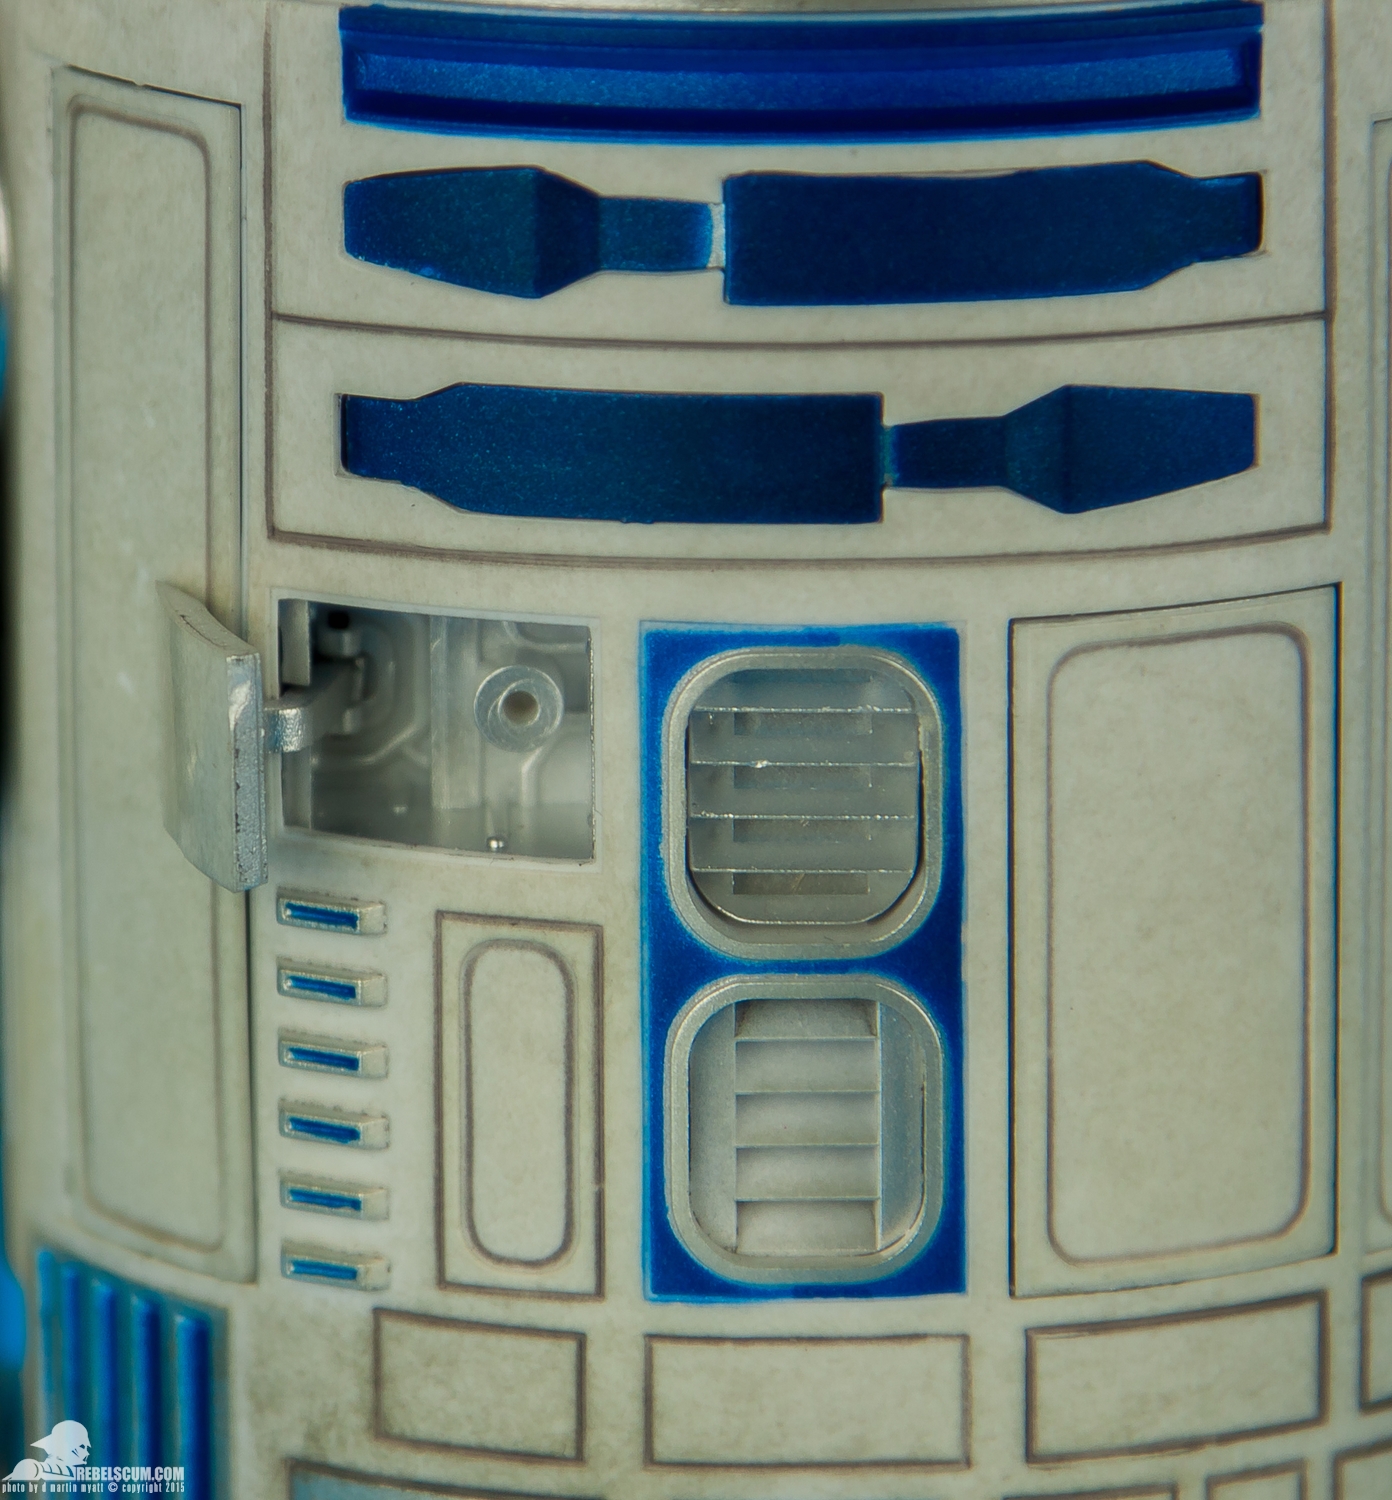 Sideshow-Collectibles-R2-D2-Sixth-Scale-Figure-Review-031.jpg